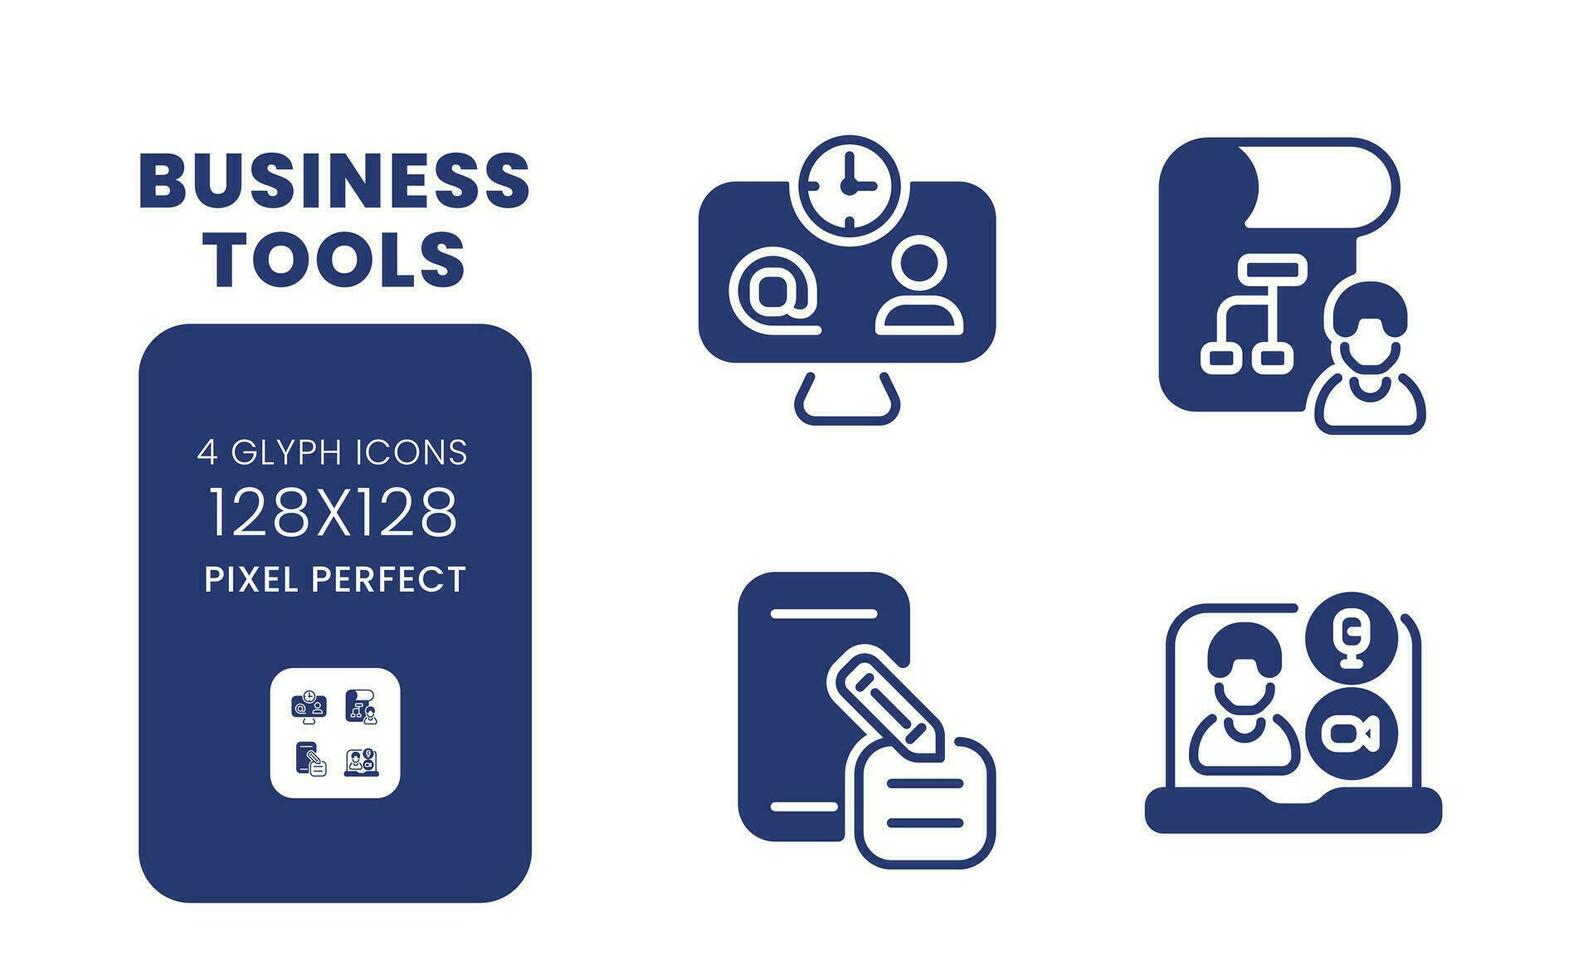 Business tools black solid desktop icons pack. Productivity software. Operations management. Pixel perfect 128x128, outline 4px. Symbols on white space. Glyph pictograms. Isolated vector images